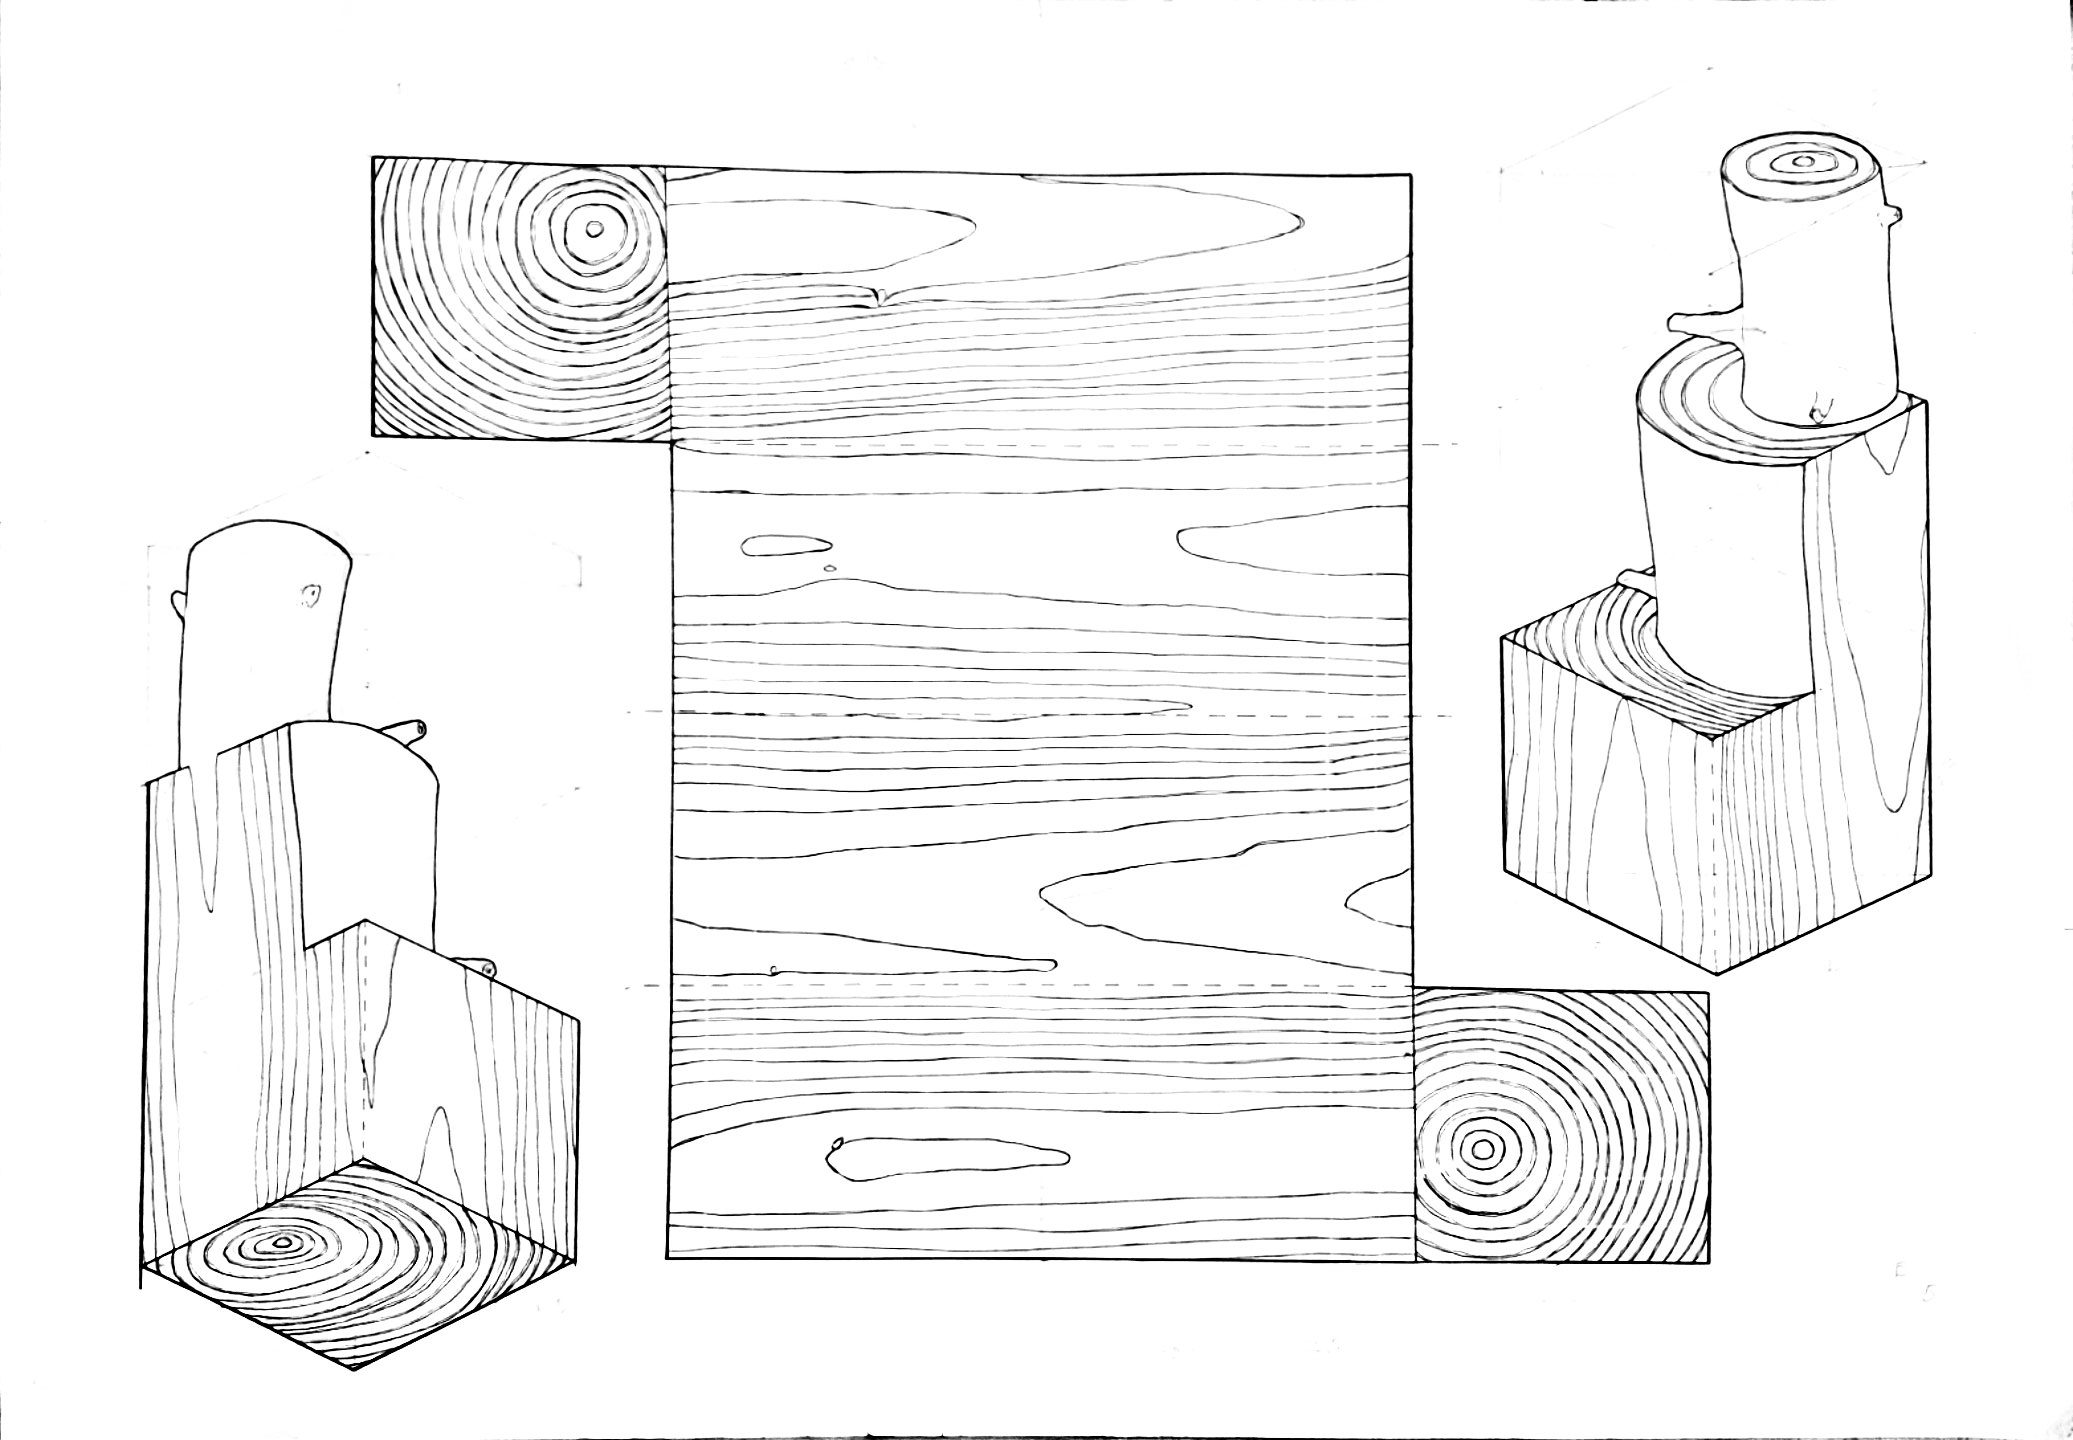 “Project 5”: Wood Block | Space & Materiality